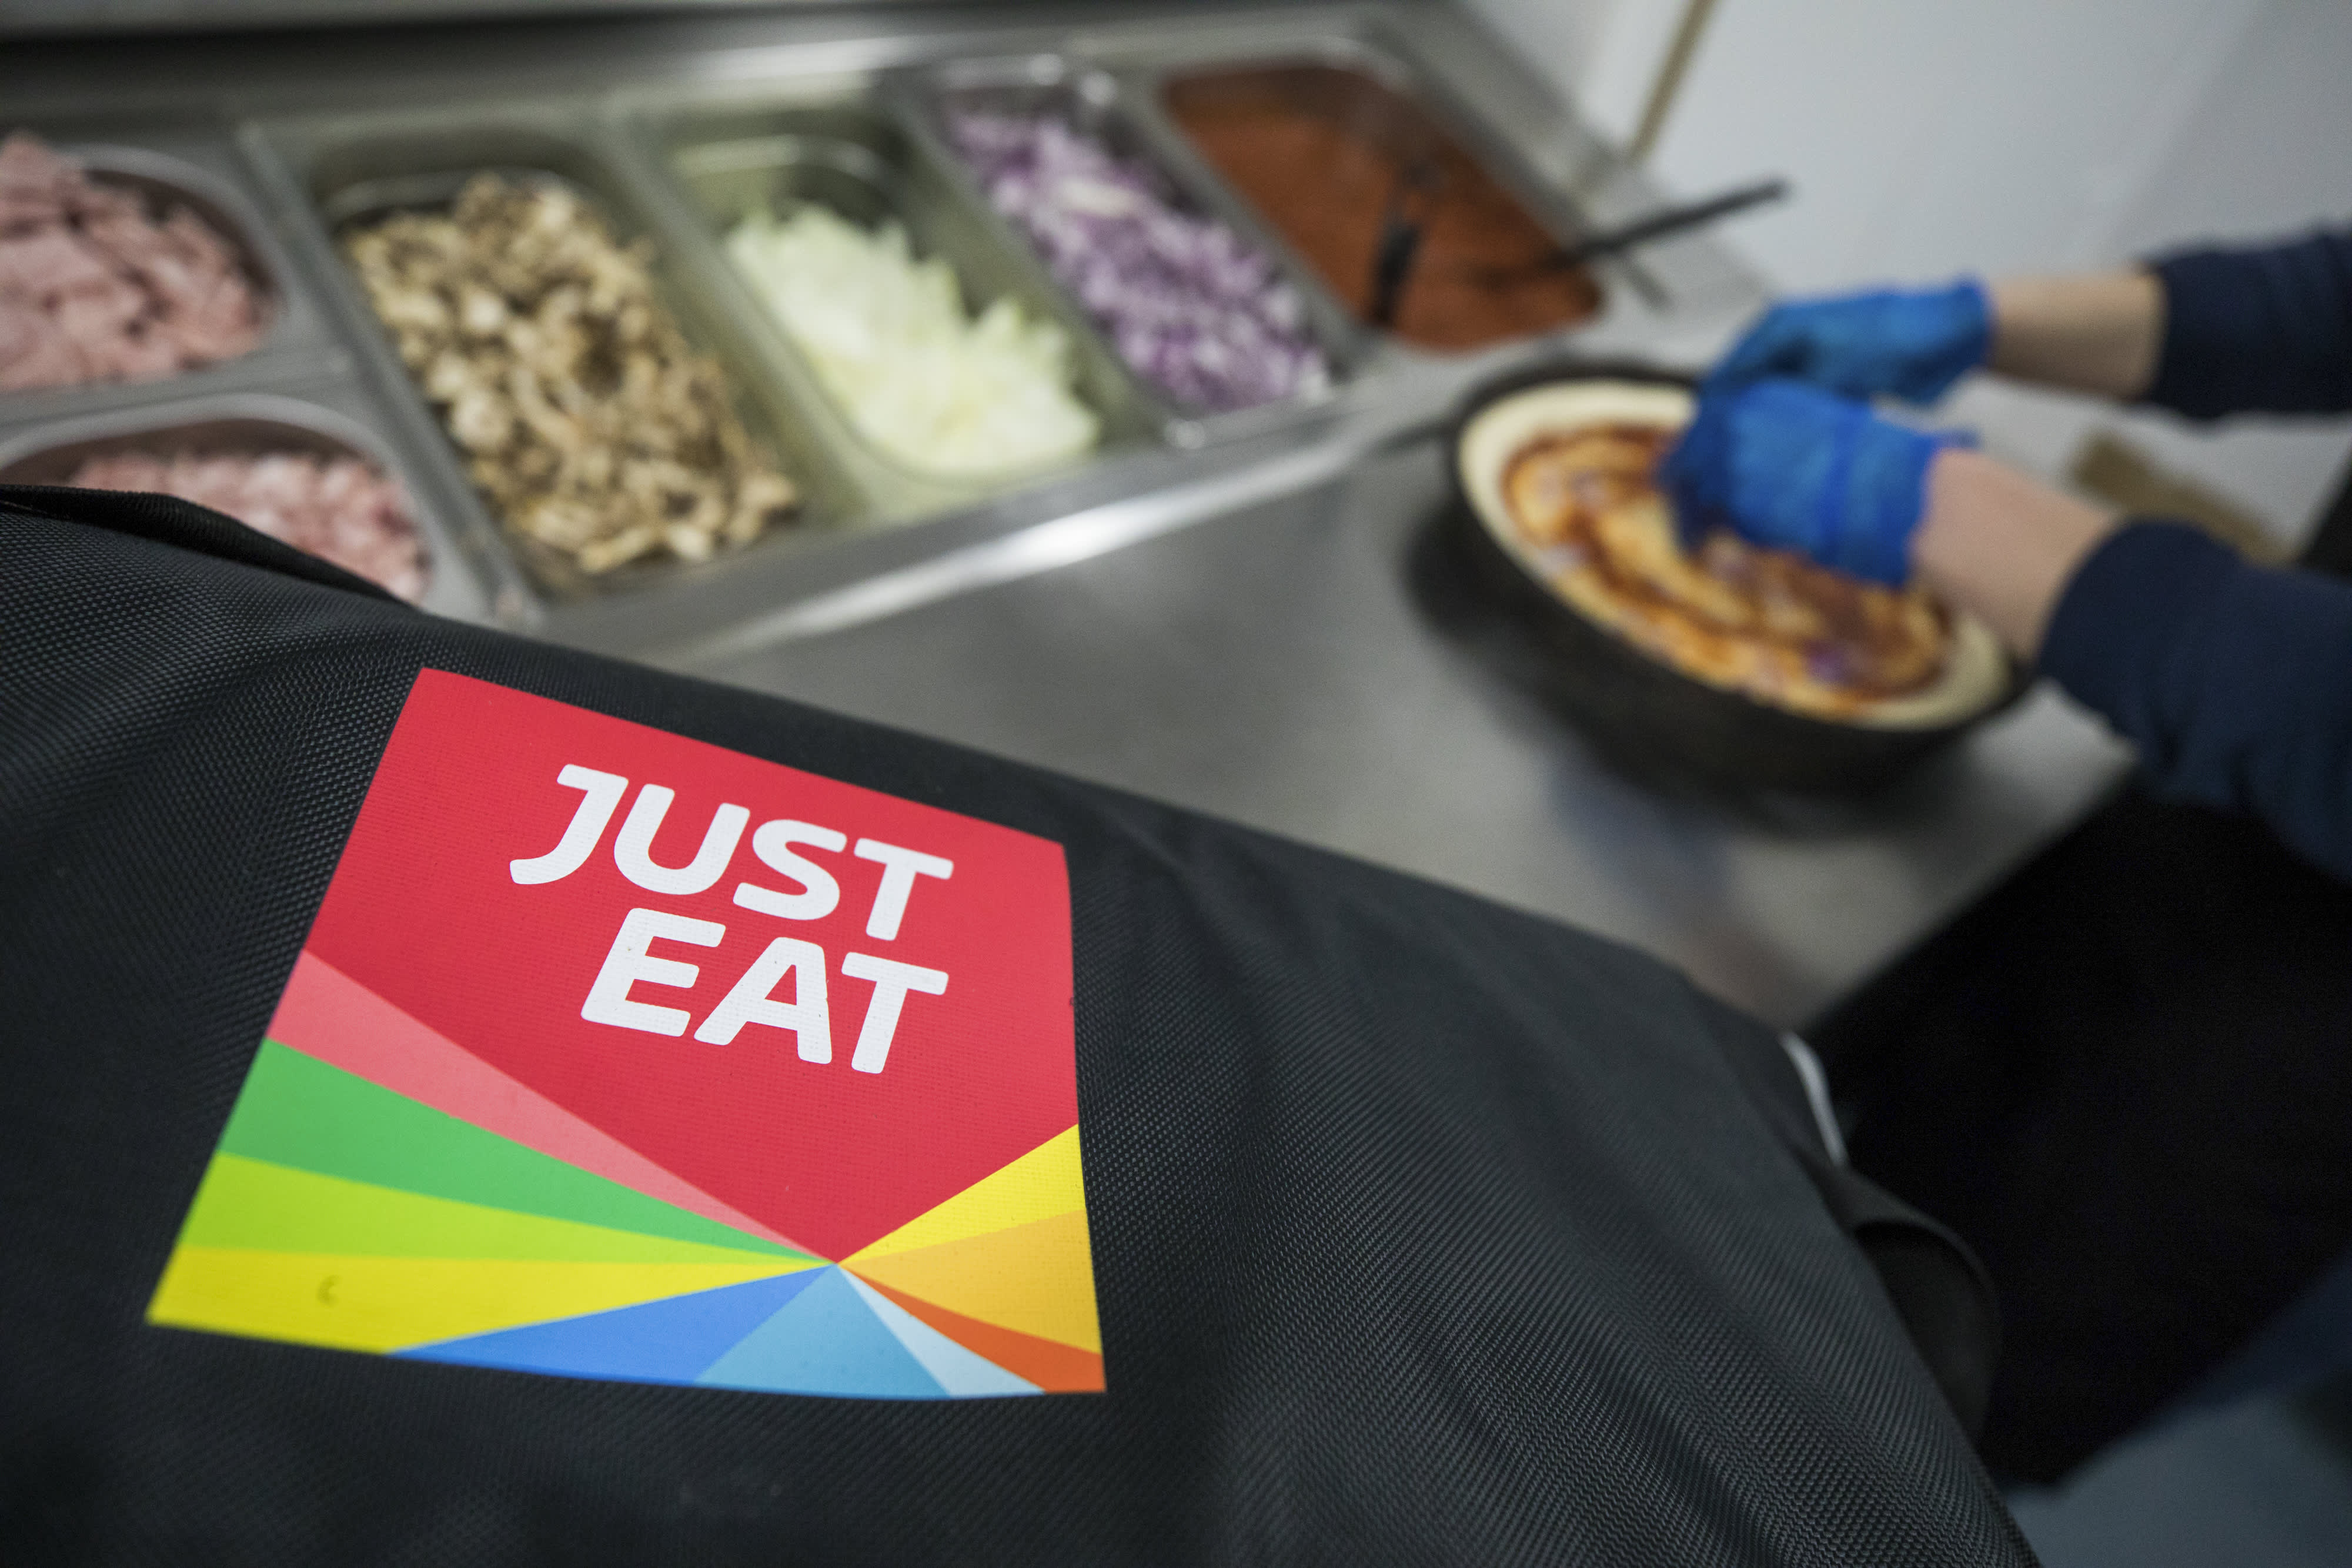 Just Eat Takeaway faces pressure from a top shareholder